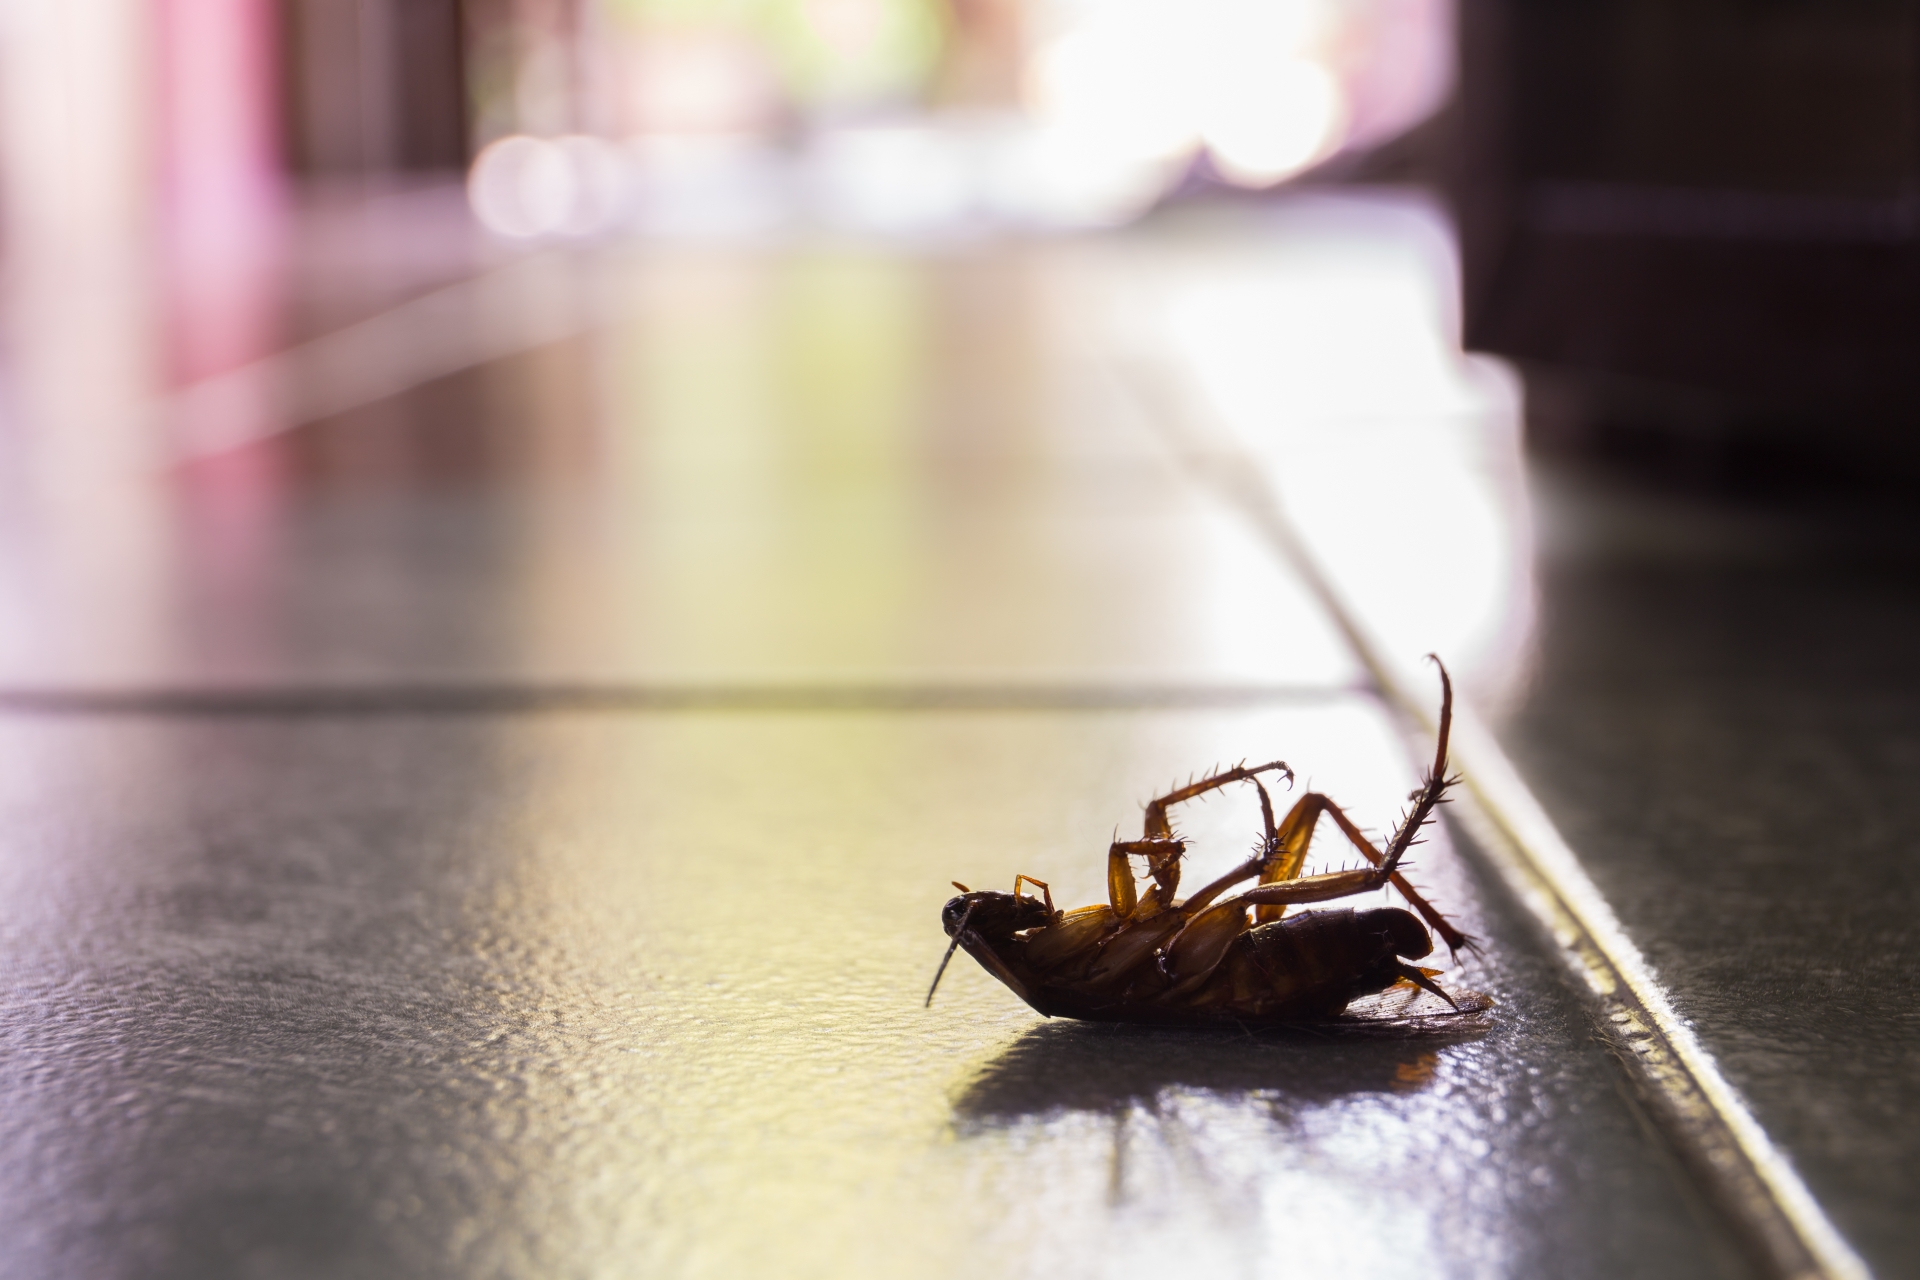 Cockroach Control, Pest Control in South Kensington, SW7. Call Now 020 8166 9746